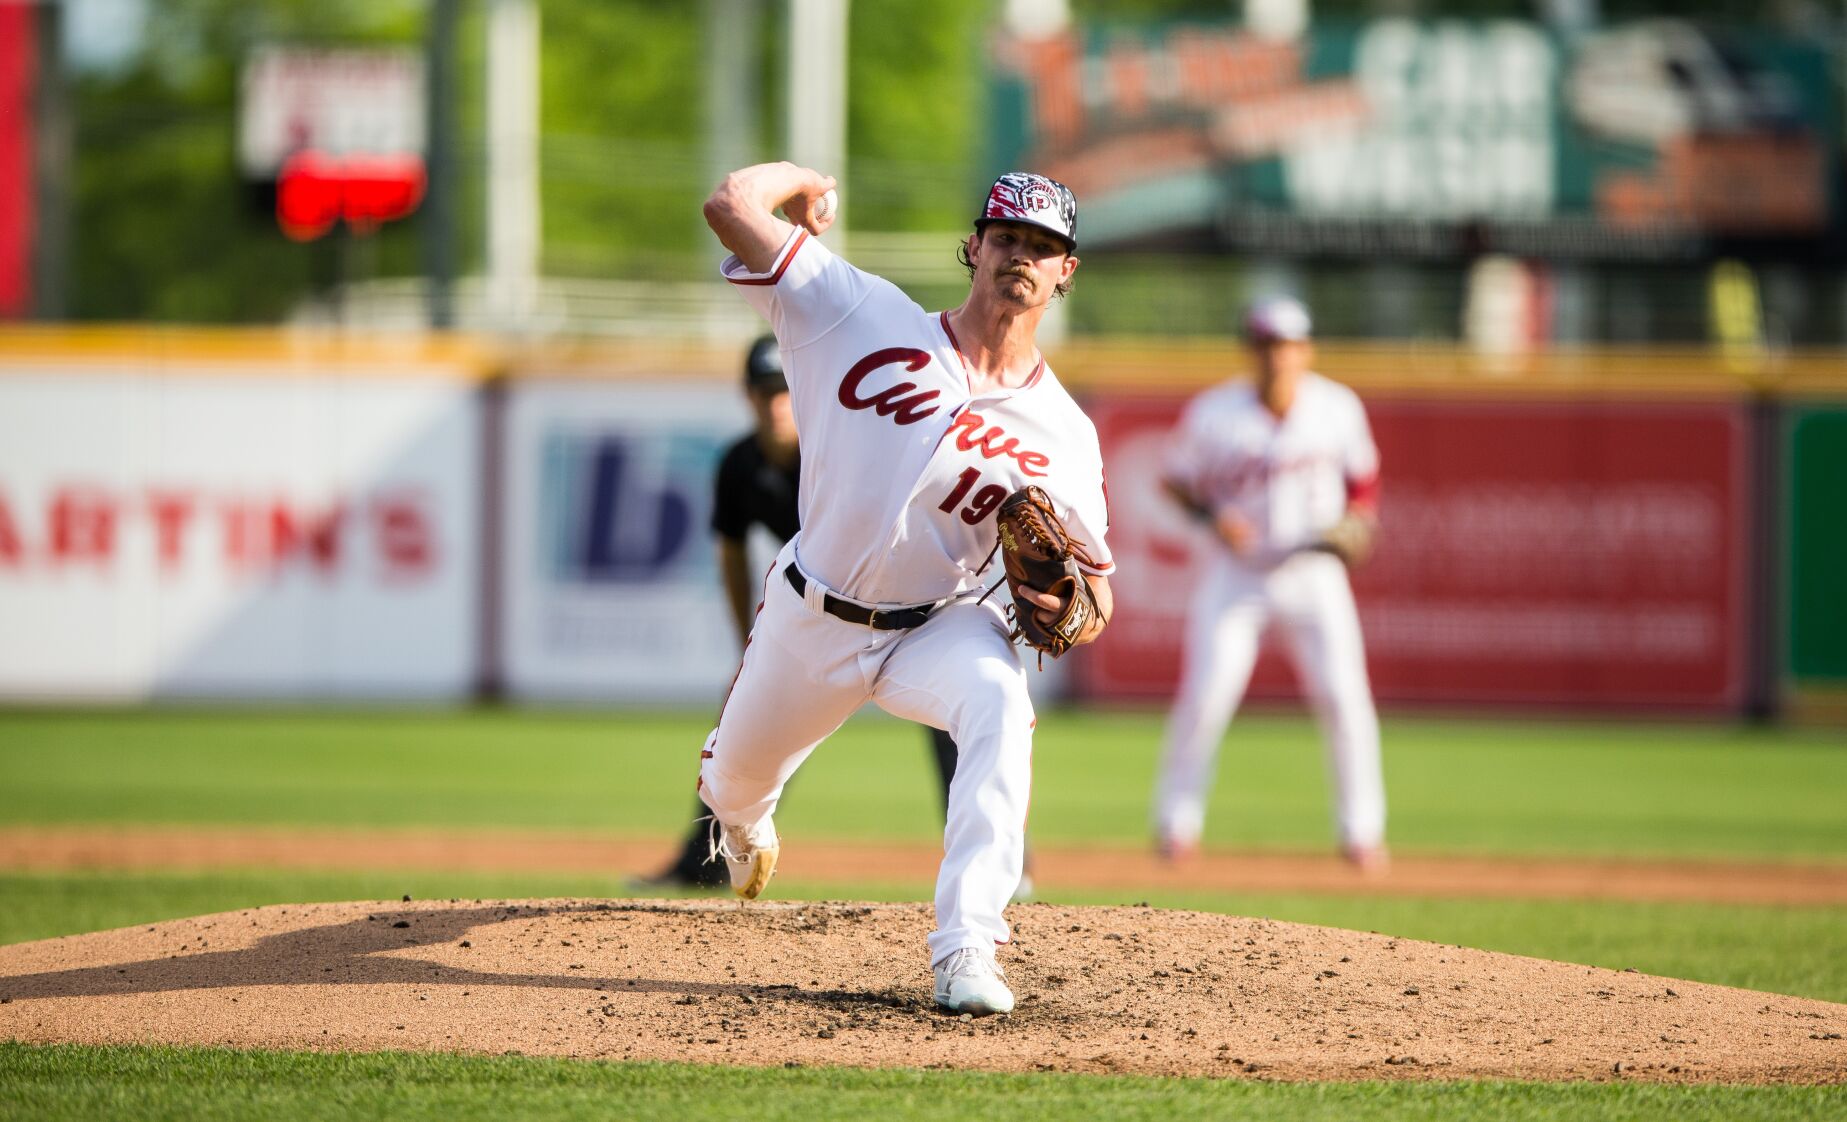 Professional Baseball Vintage graduate Aaron Shortridge comes back to pitch another year